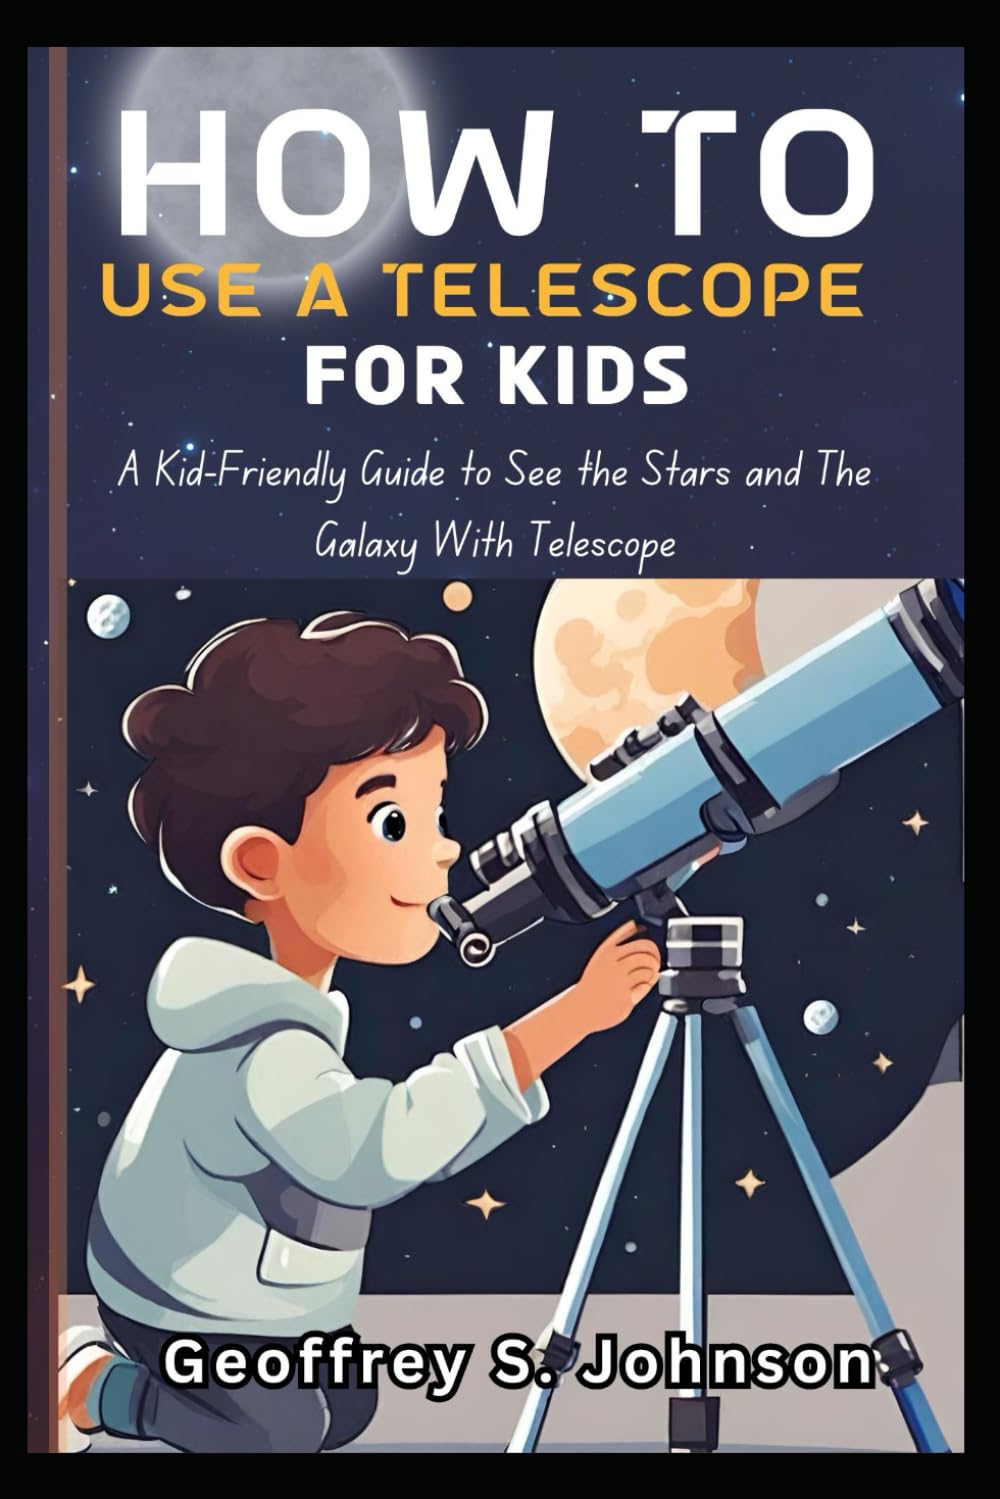 HOW TO USE A TELESCOPE FOR KIDS: A Kid-Friendly Guide to See the Stars and The Galaxy With Telescope